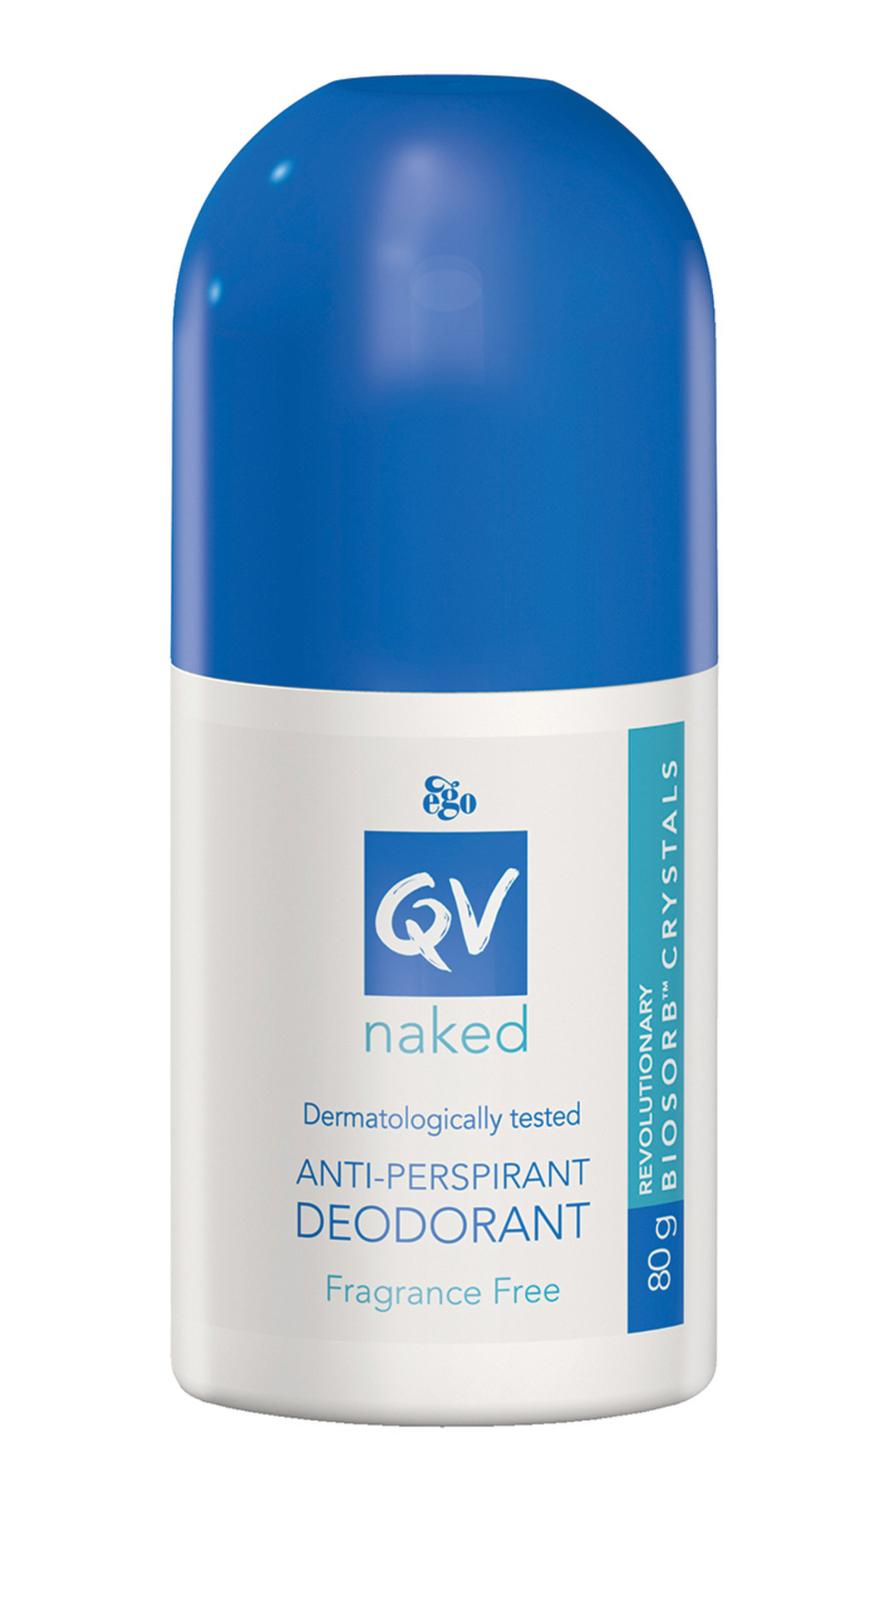 Ego QV Naked Anti-Perspirant Deodorant | ProductReview.com.au